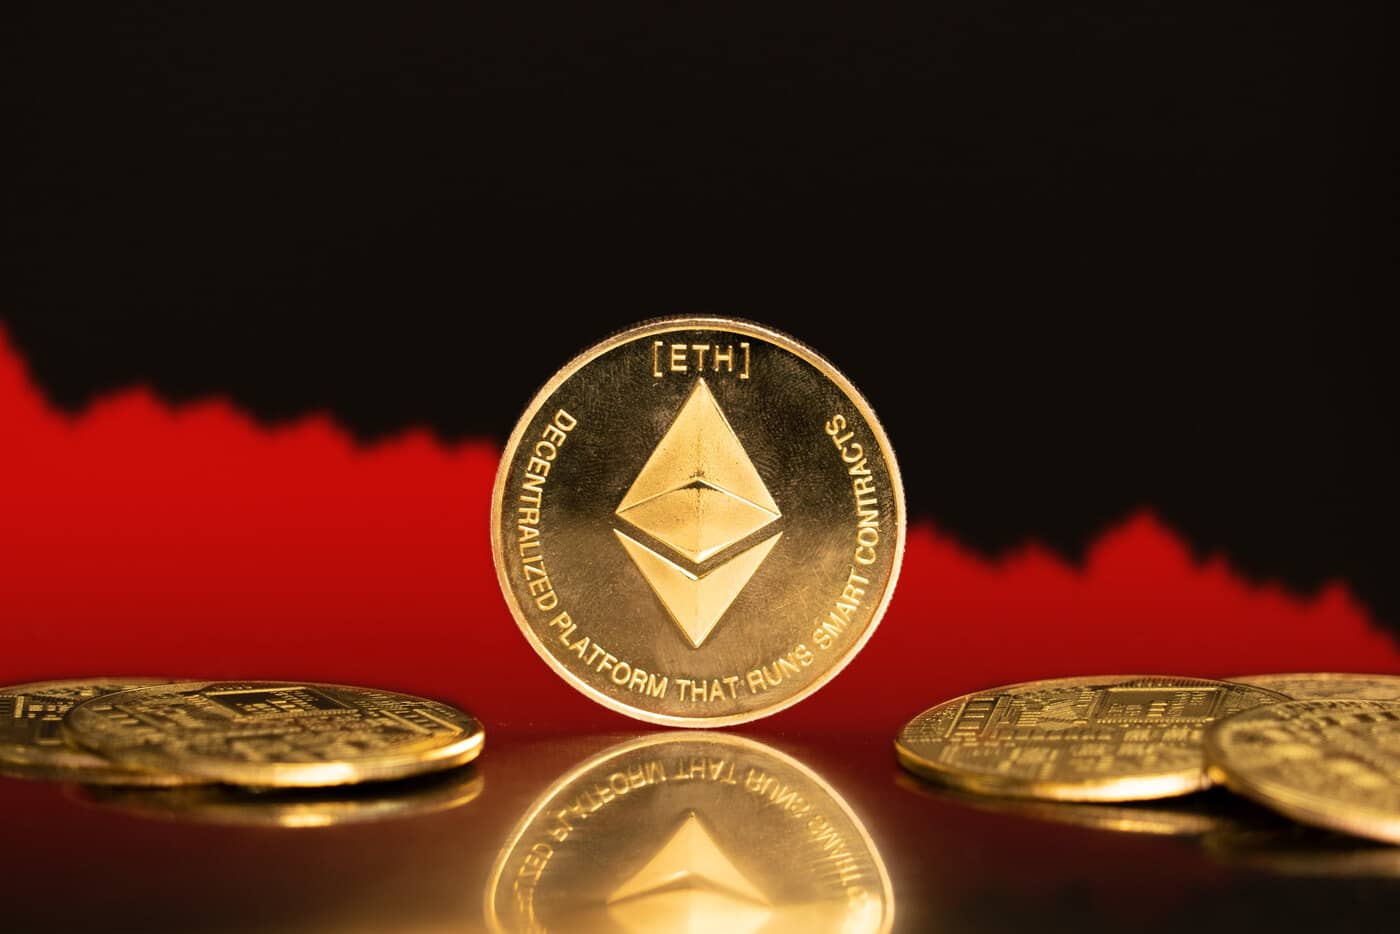 Ethereum’s Price Could Drop To $1,000: Crypto Expert Warns